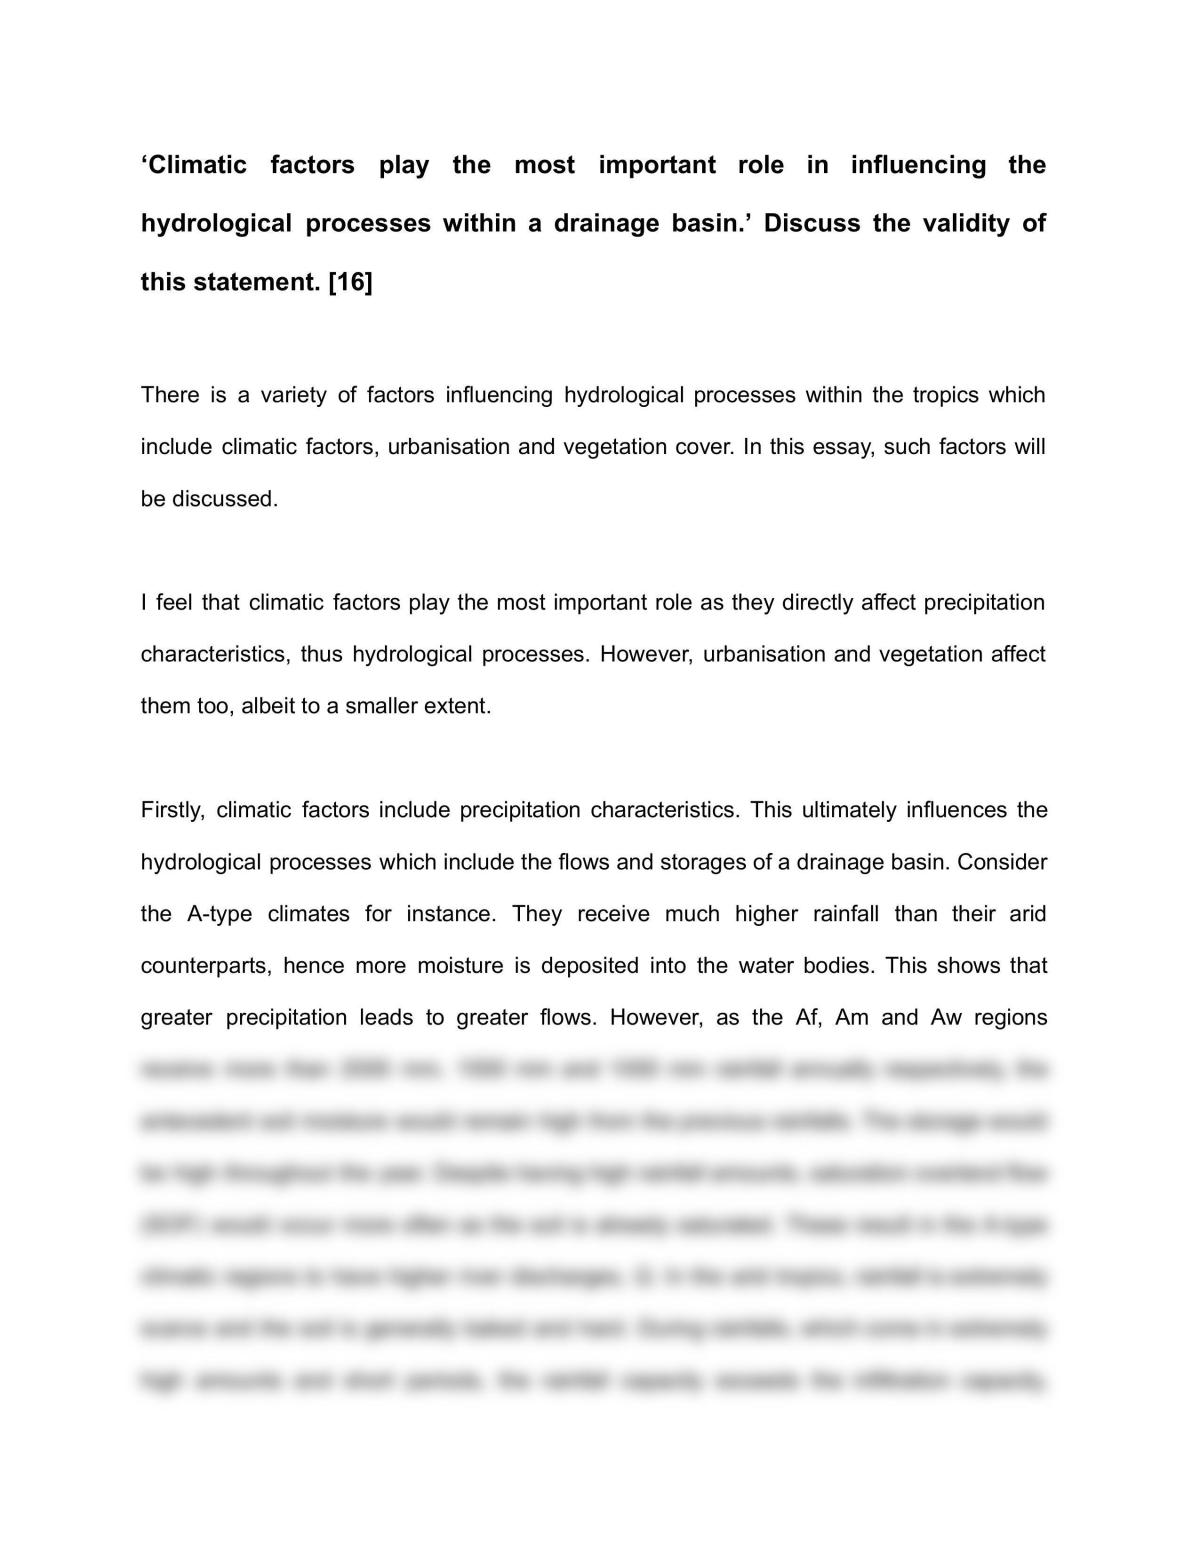 Climatic factors play the most important role in influencing hydrological process - Page 1